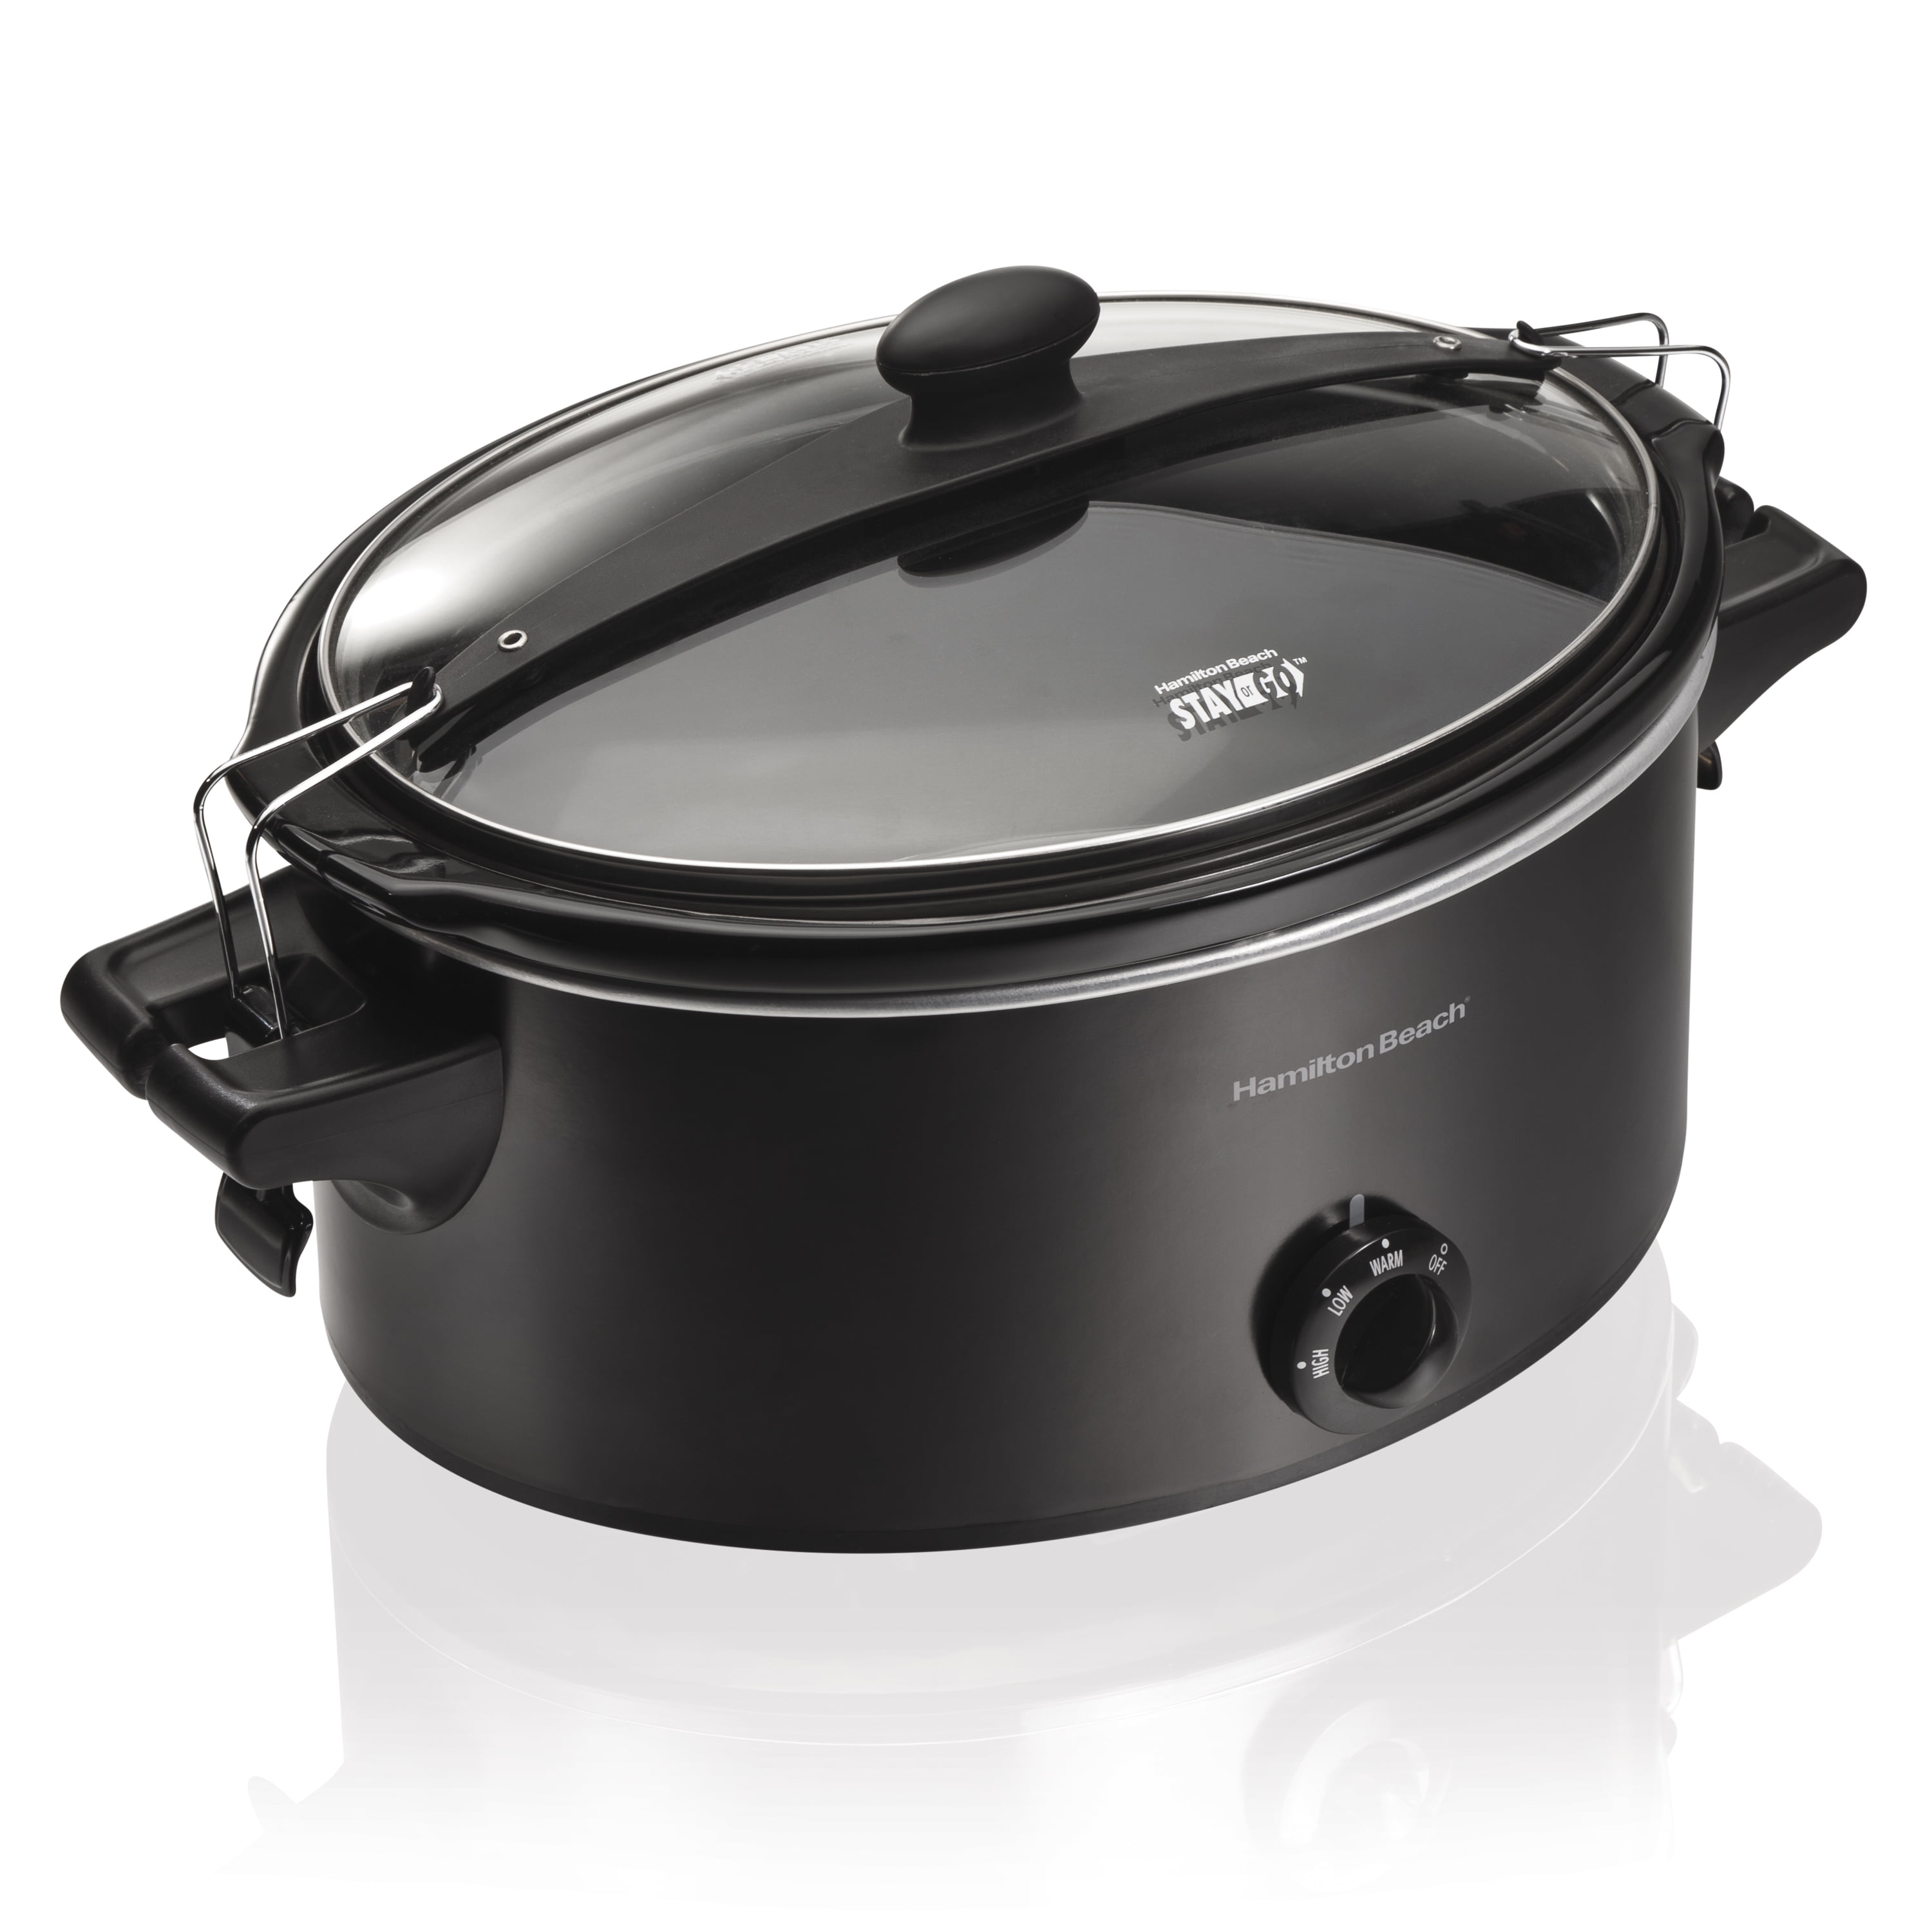 Hamilton Beach Stay or Go Portable Slow Cooker with Lid Lock